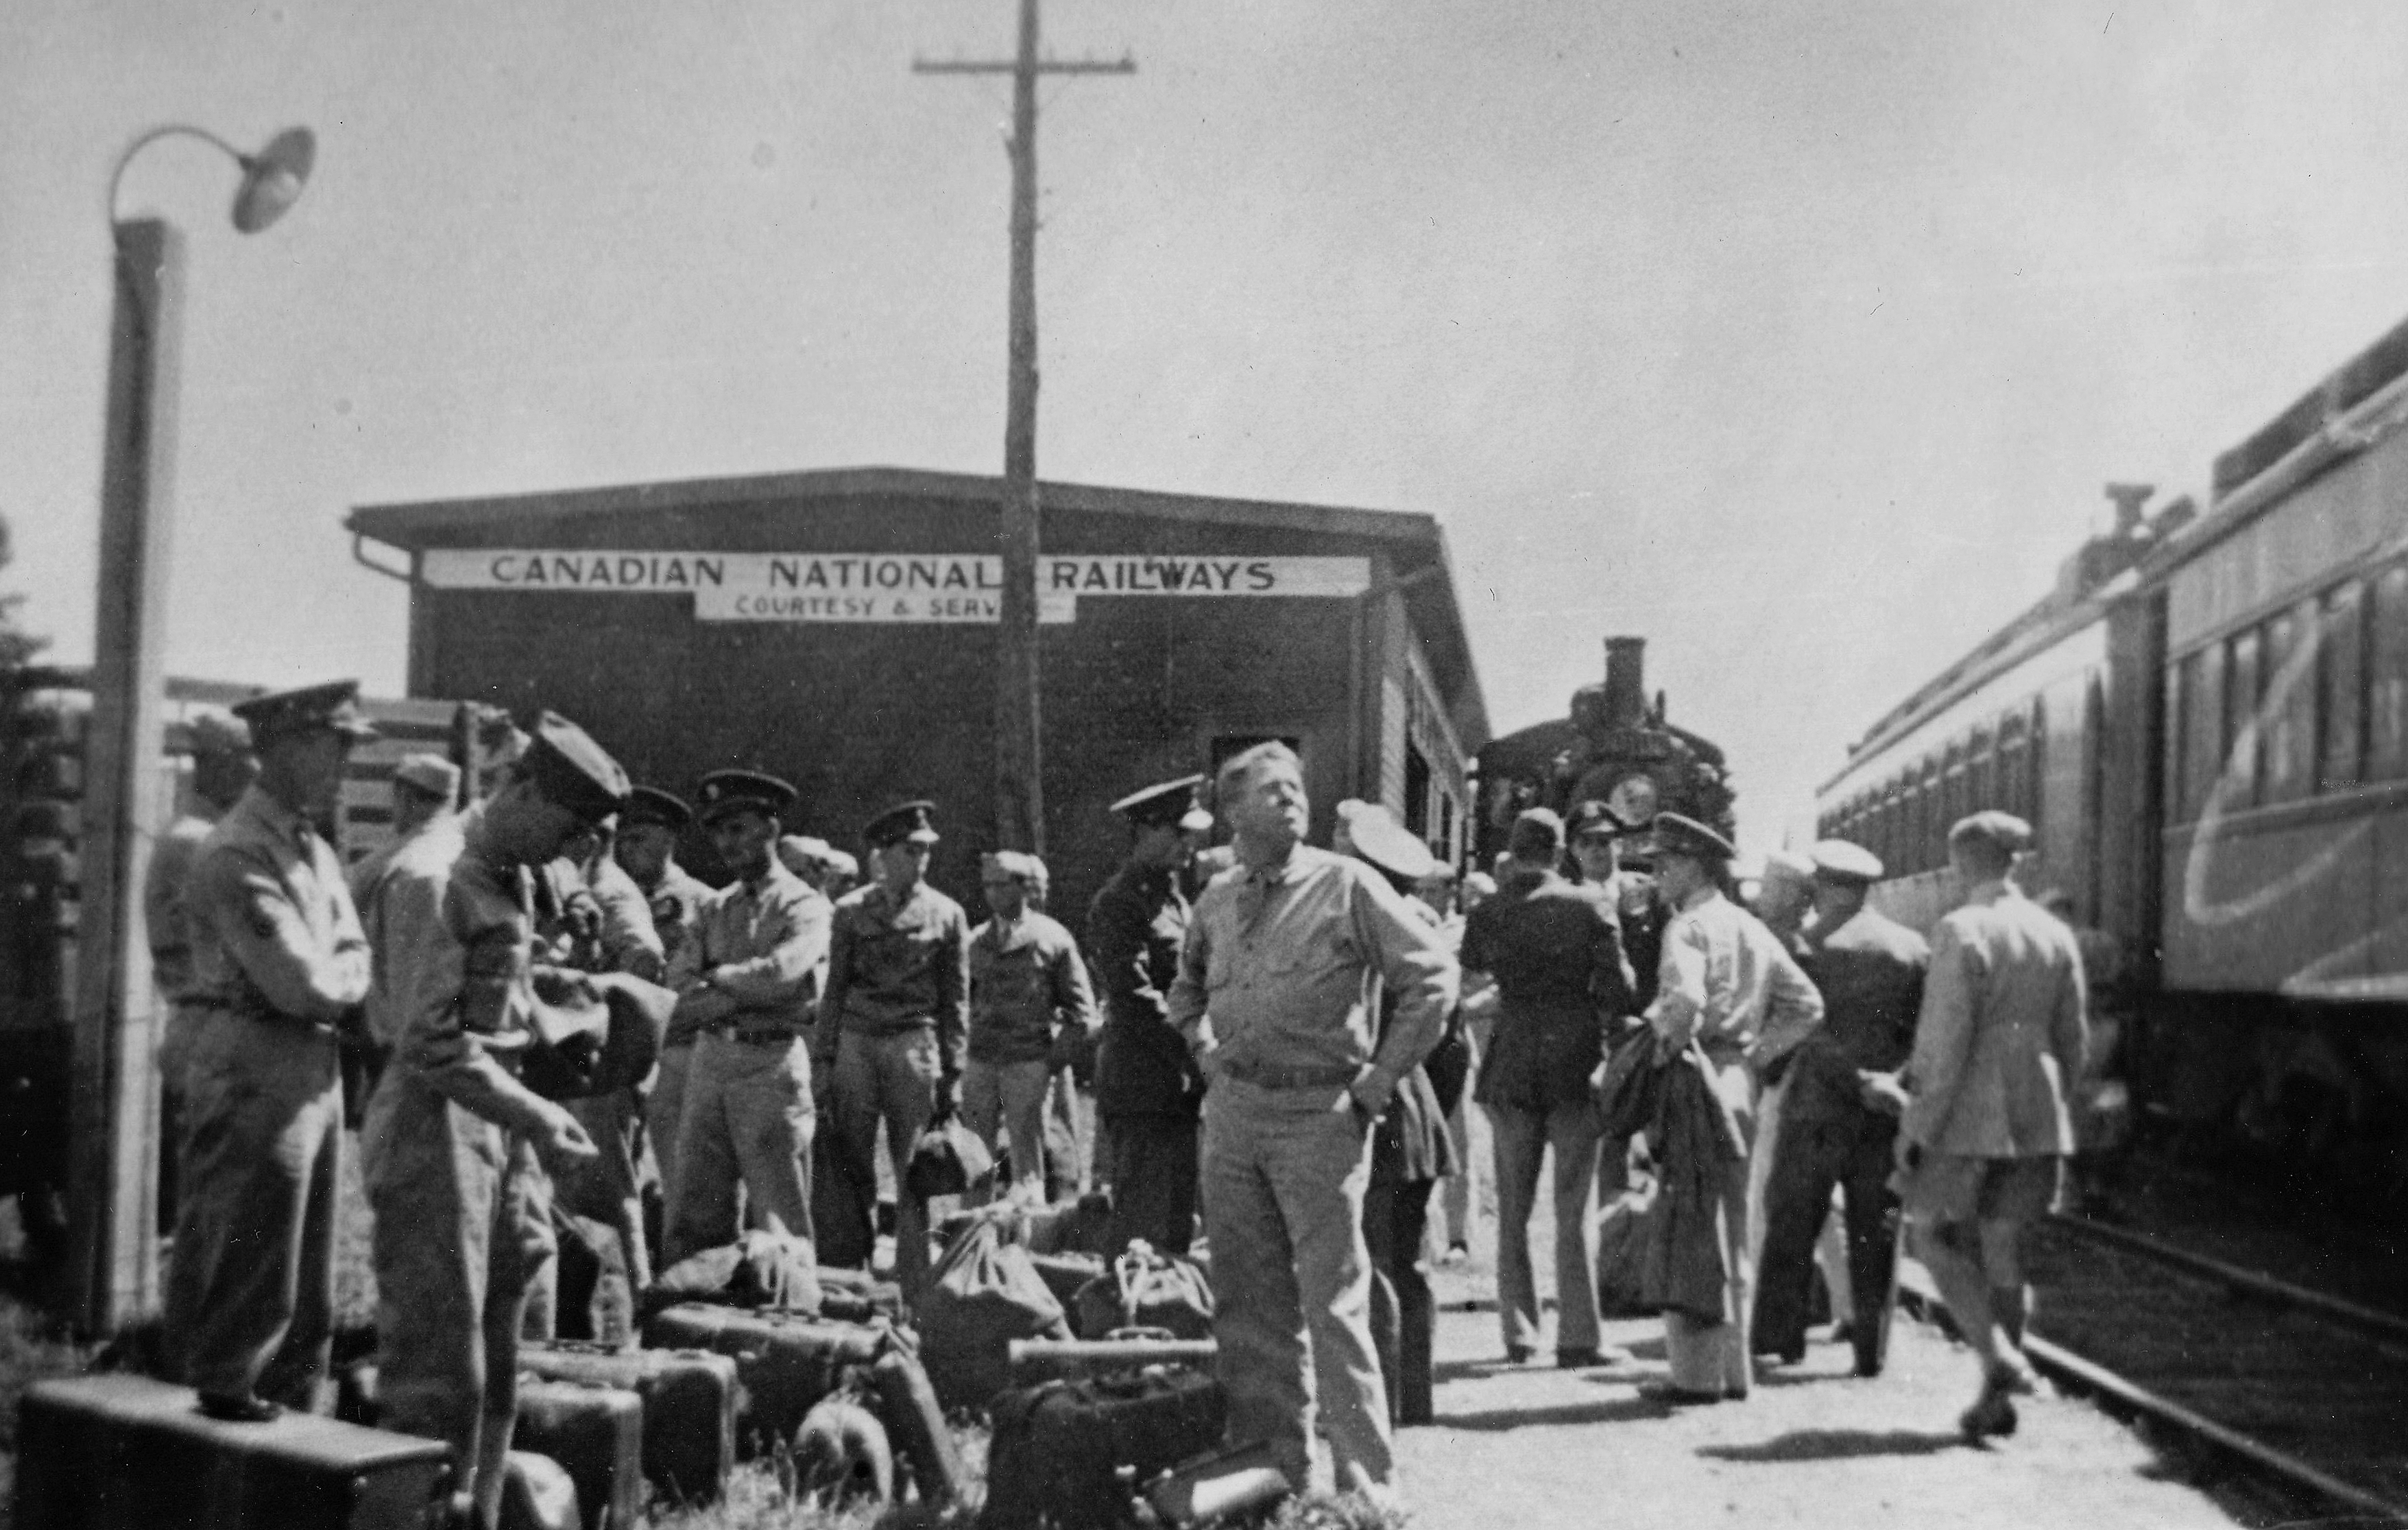 U.S. Army soldiers standing on a railway platform. Locomotive and train cars to the right. Behind them is the train station with a sign on top of the building that says: "Canadian National Railways, Courtesy and Service"